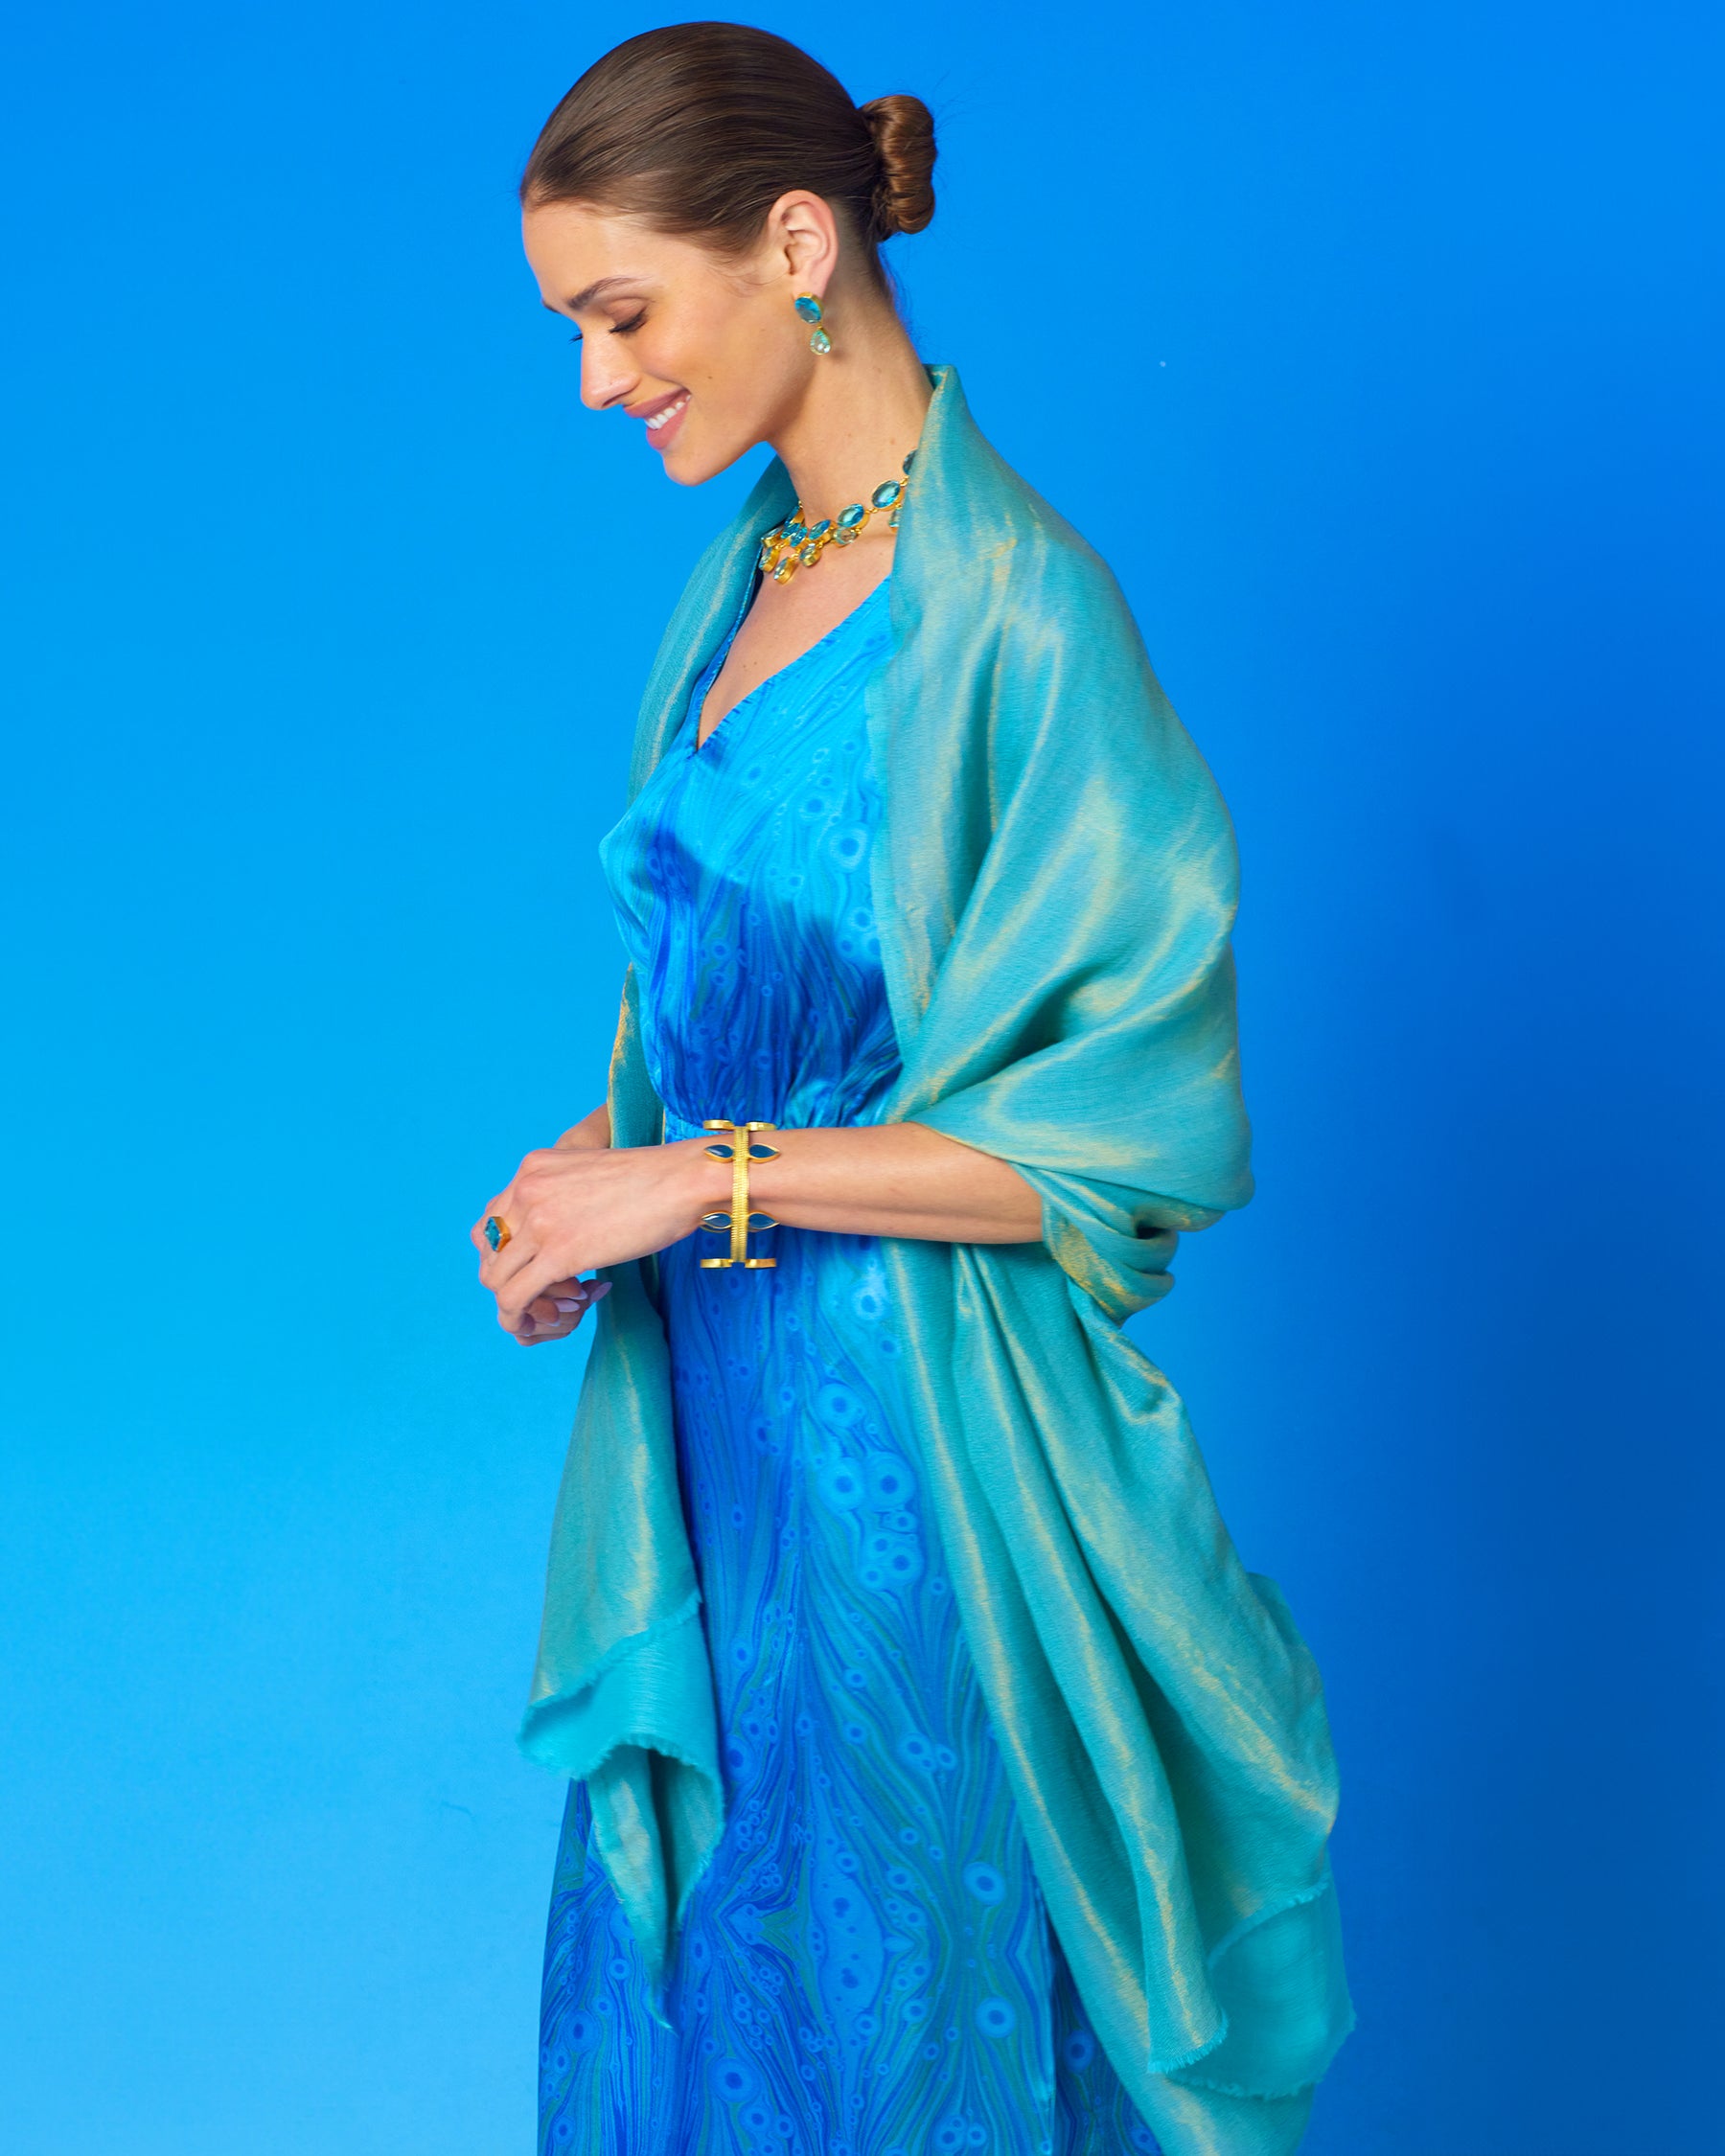 Calliope Long Silk Dress in Sea Nymph Blues with the Josephine Pashmina Shawl in Turquoise Gold Shimmer draped over the shoulders side view smiling